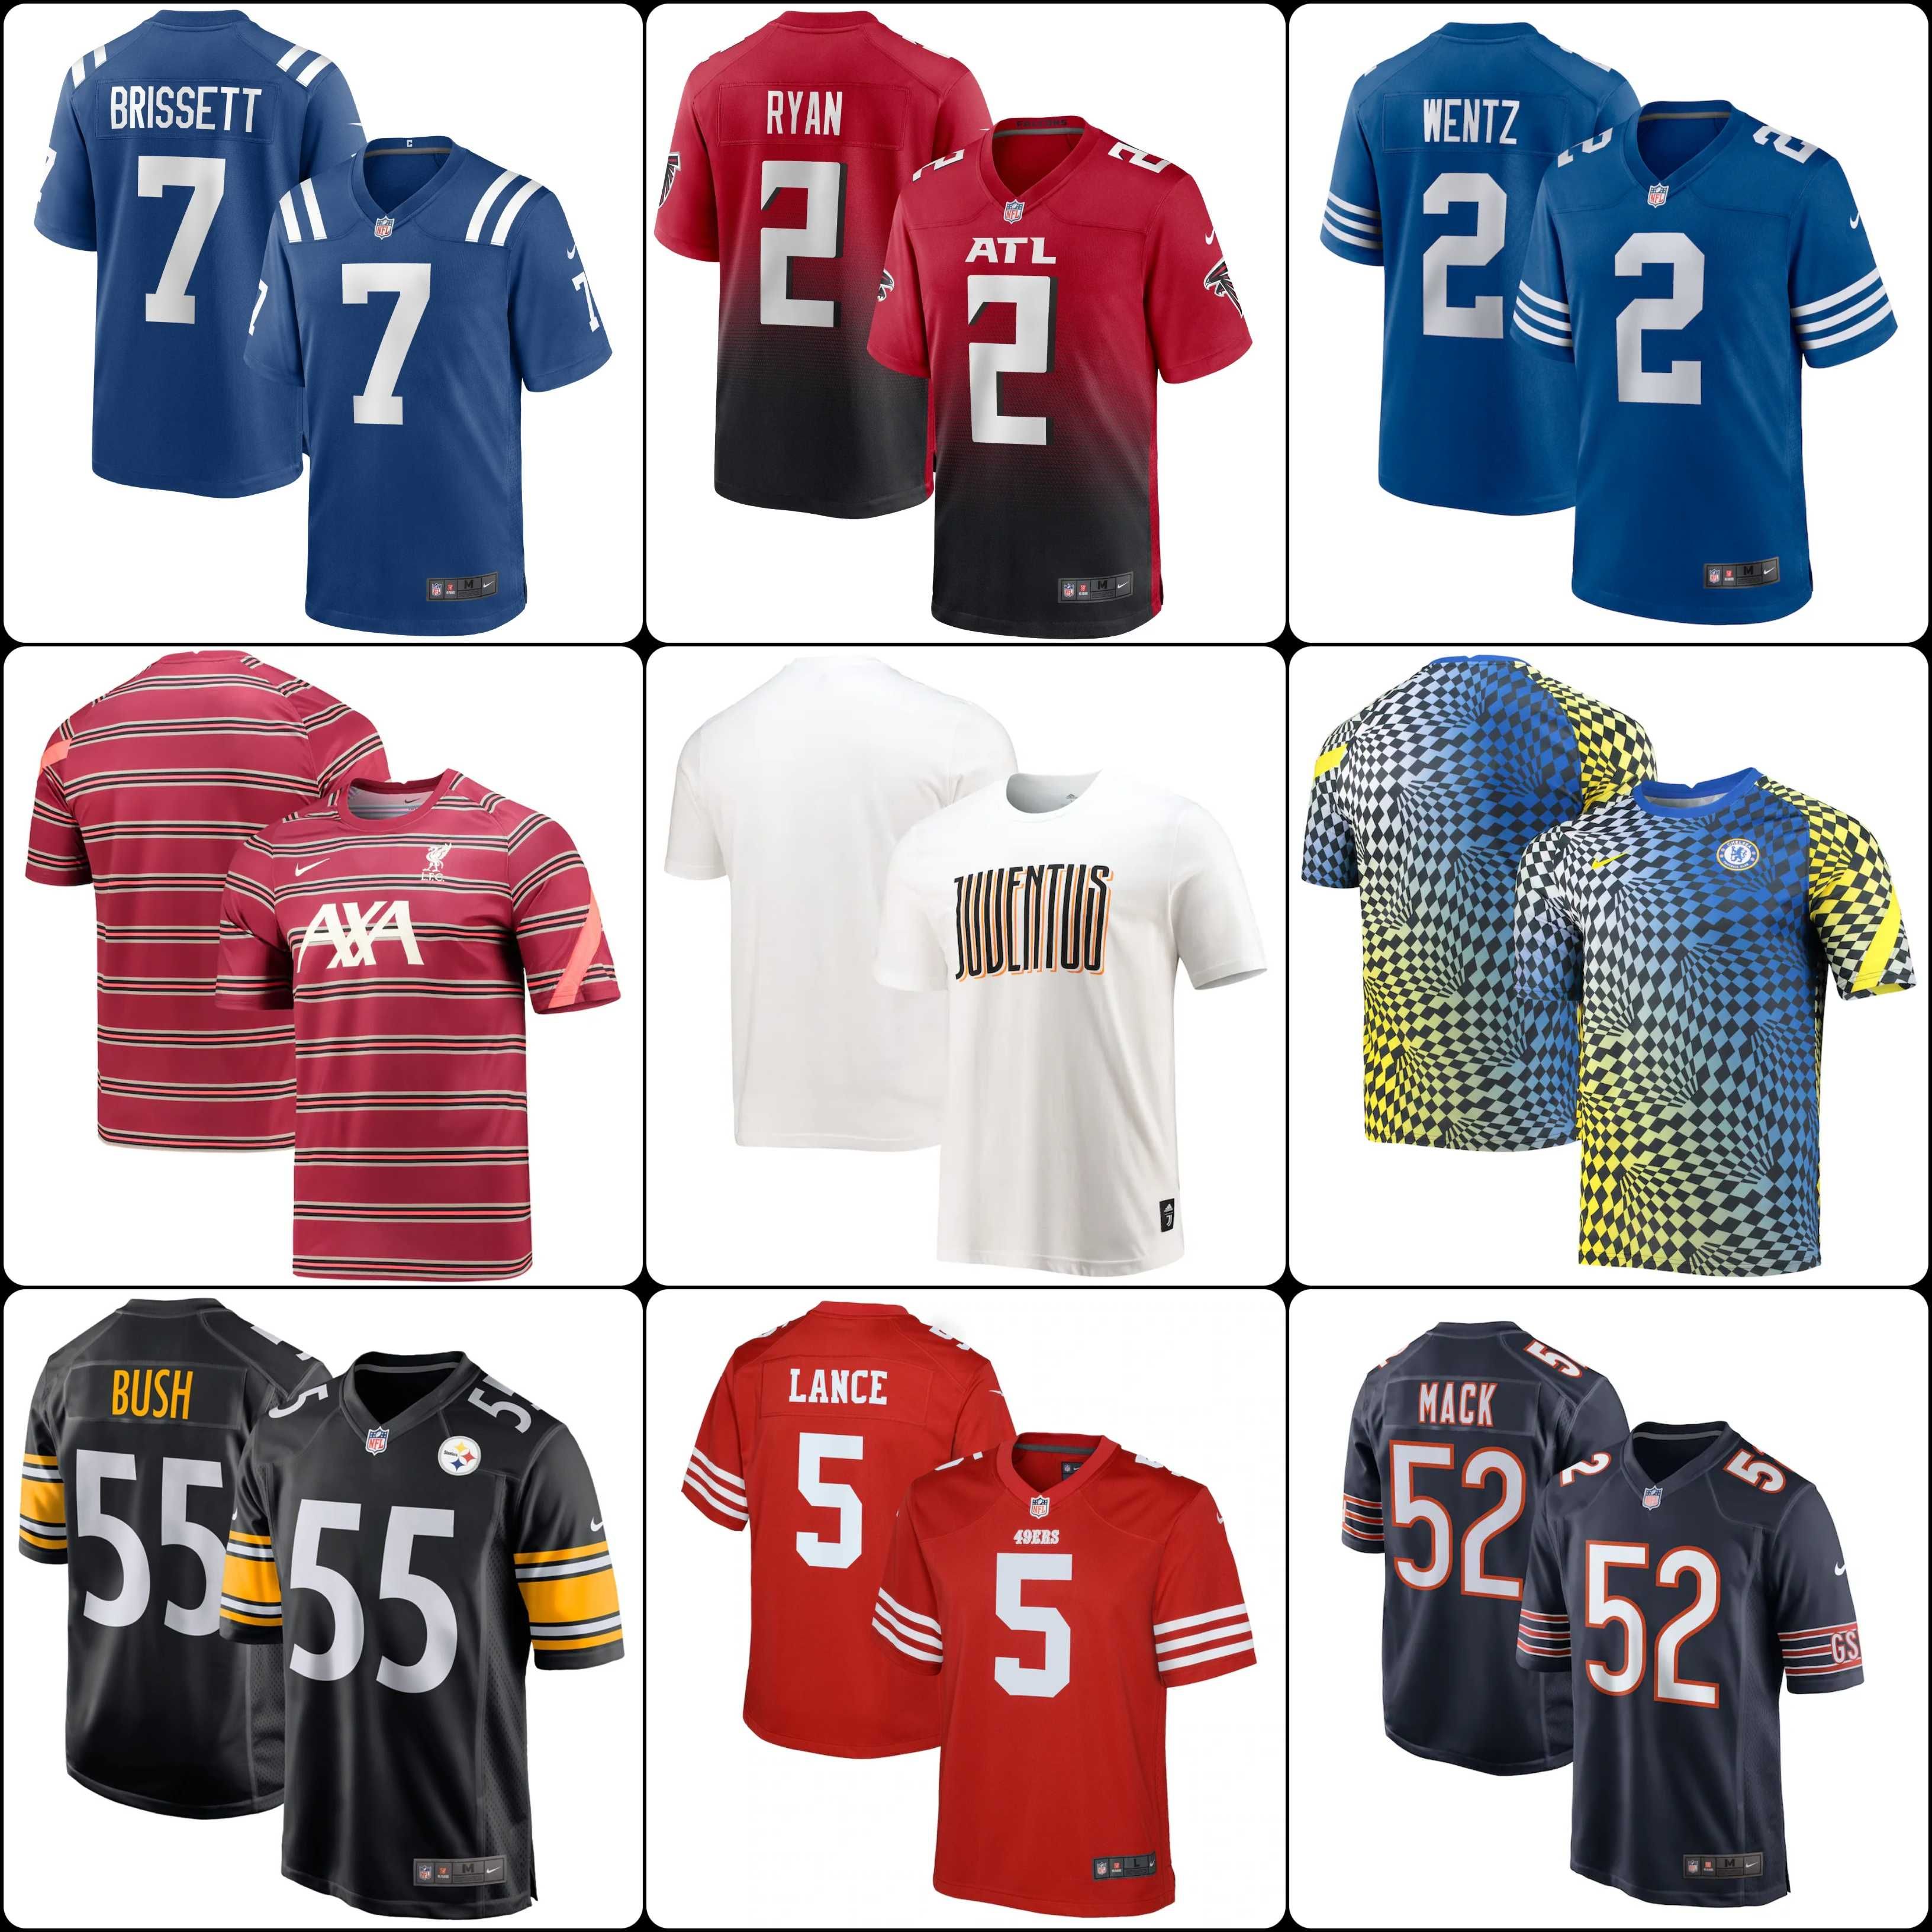 NIKE tricou suporter/152 158 164 170 S/Juventus/Chelsea/Liverpool/NFL